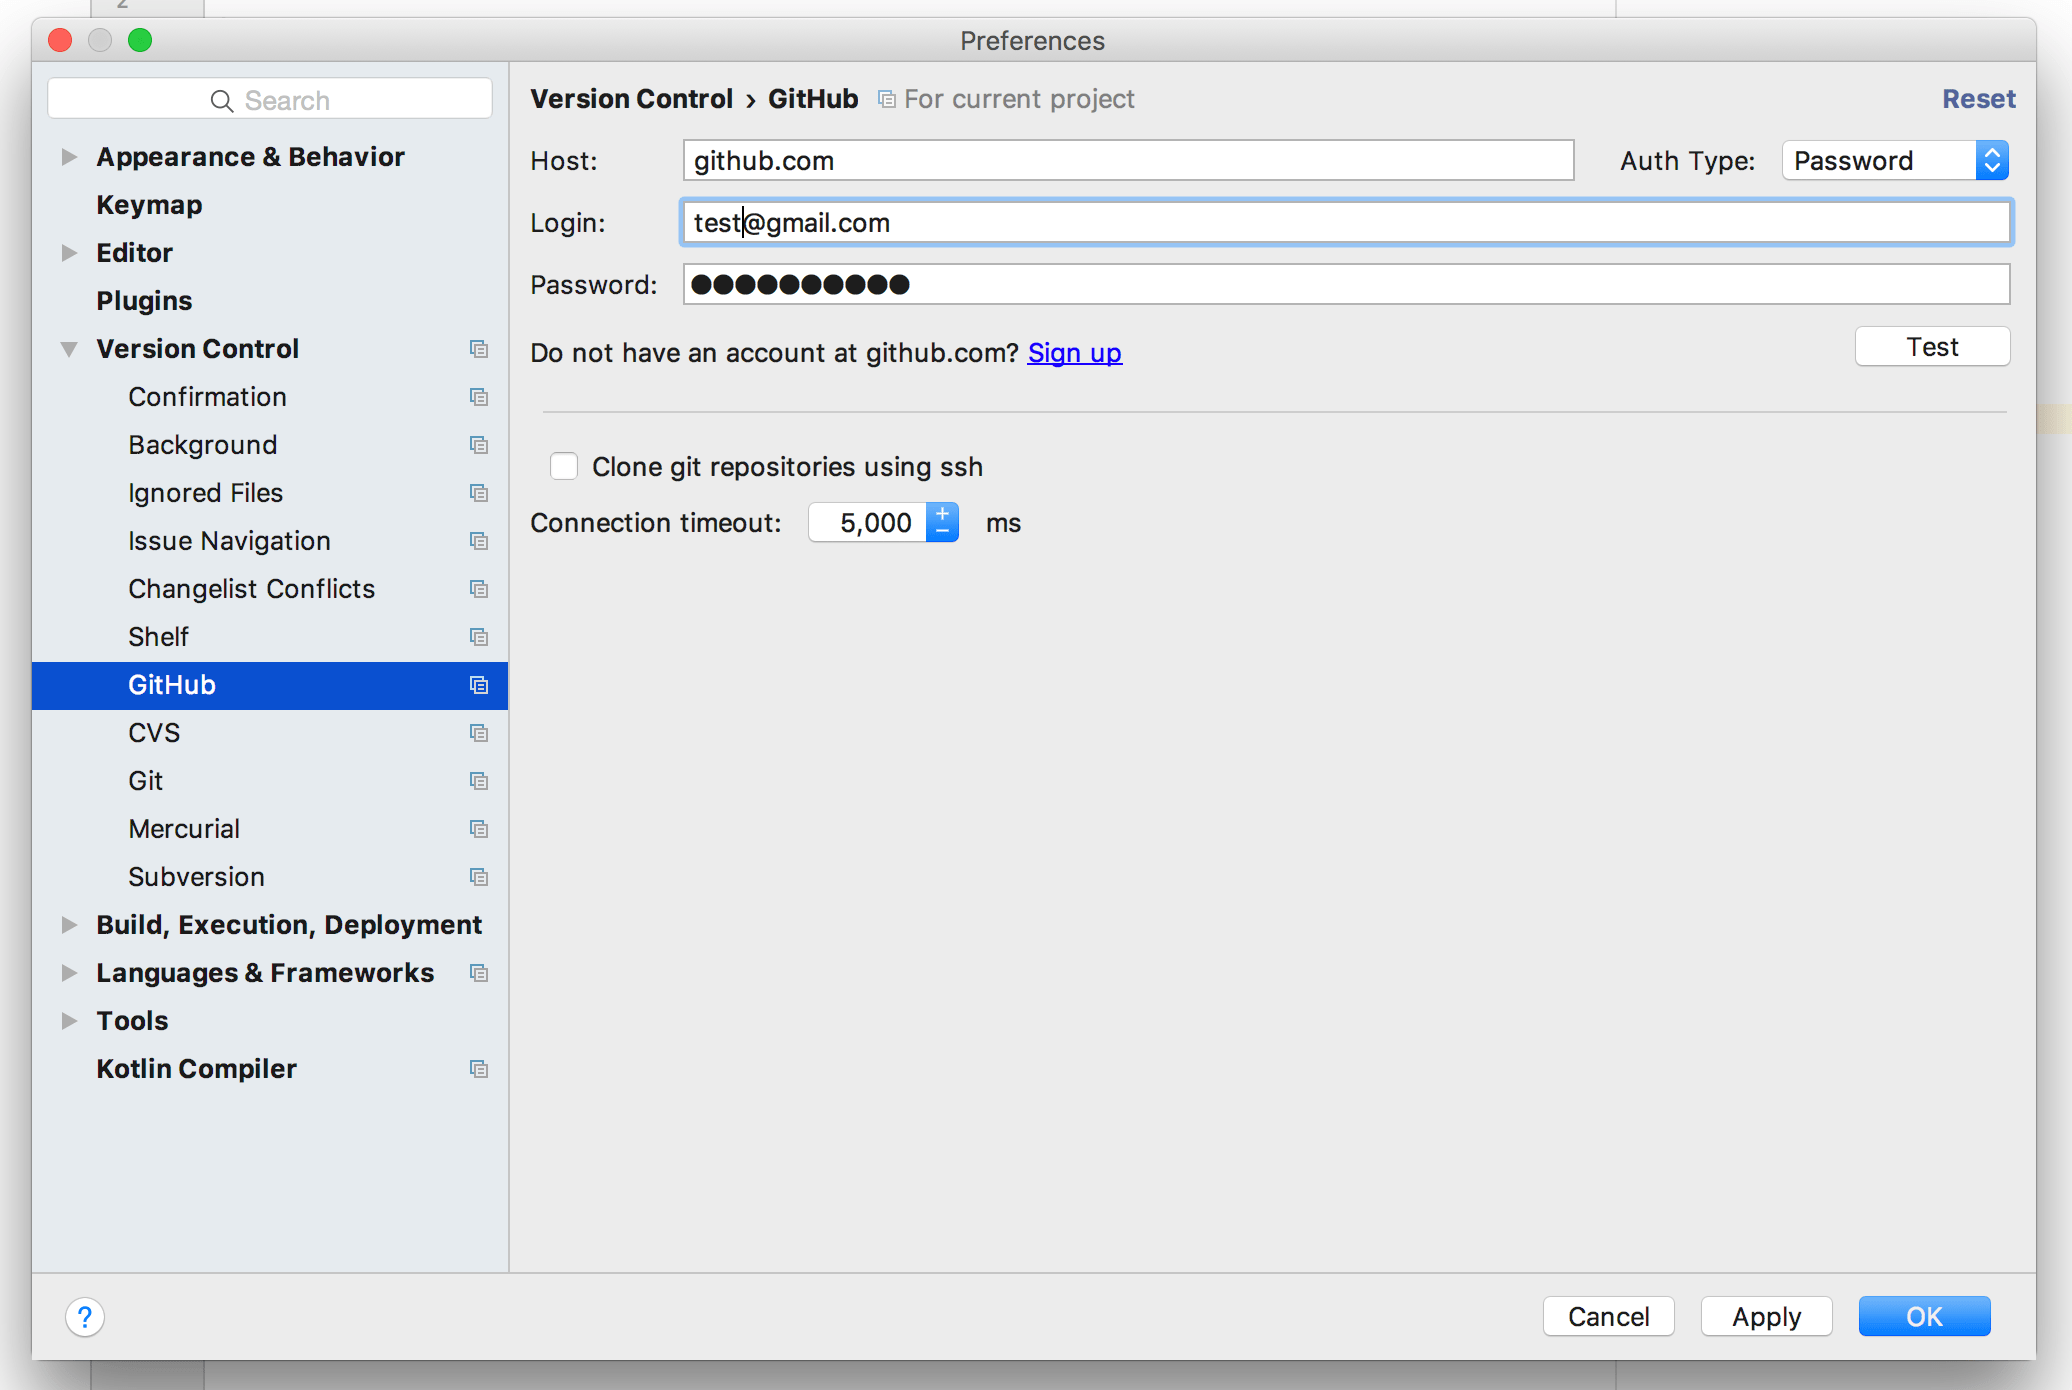 how to install android studio in mac